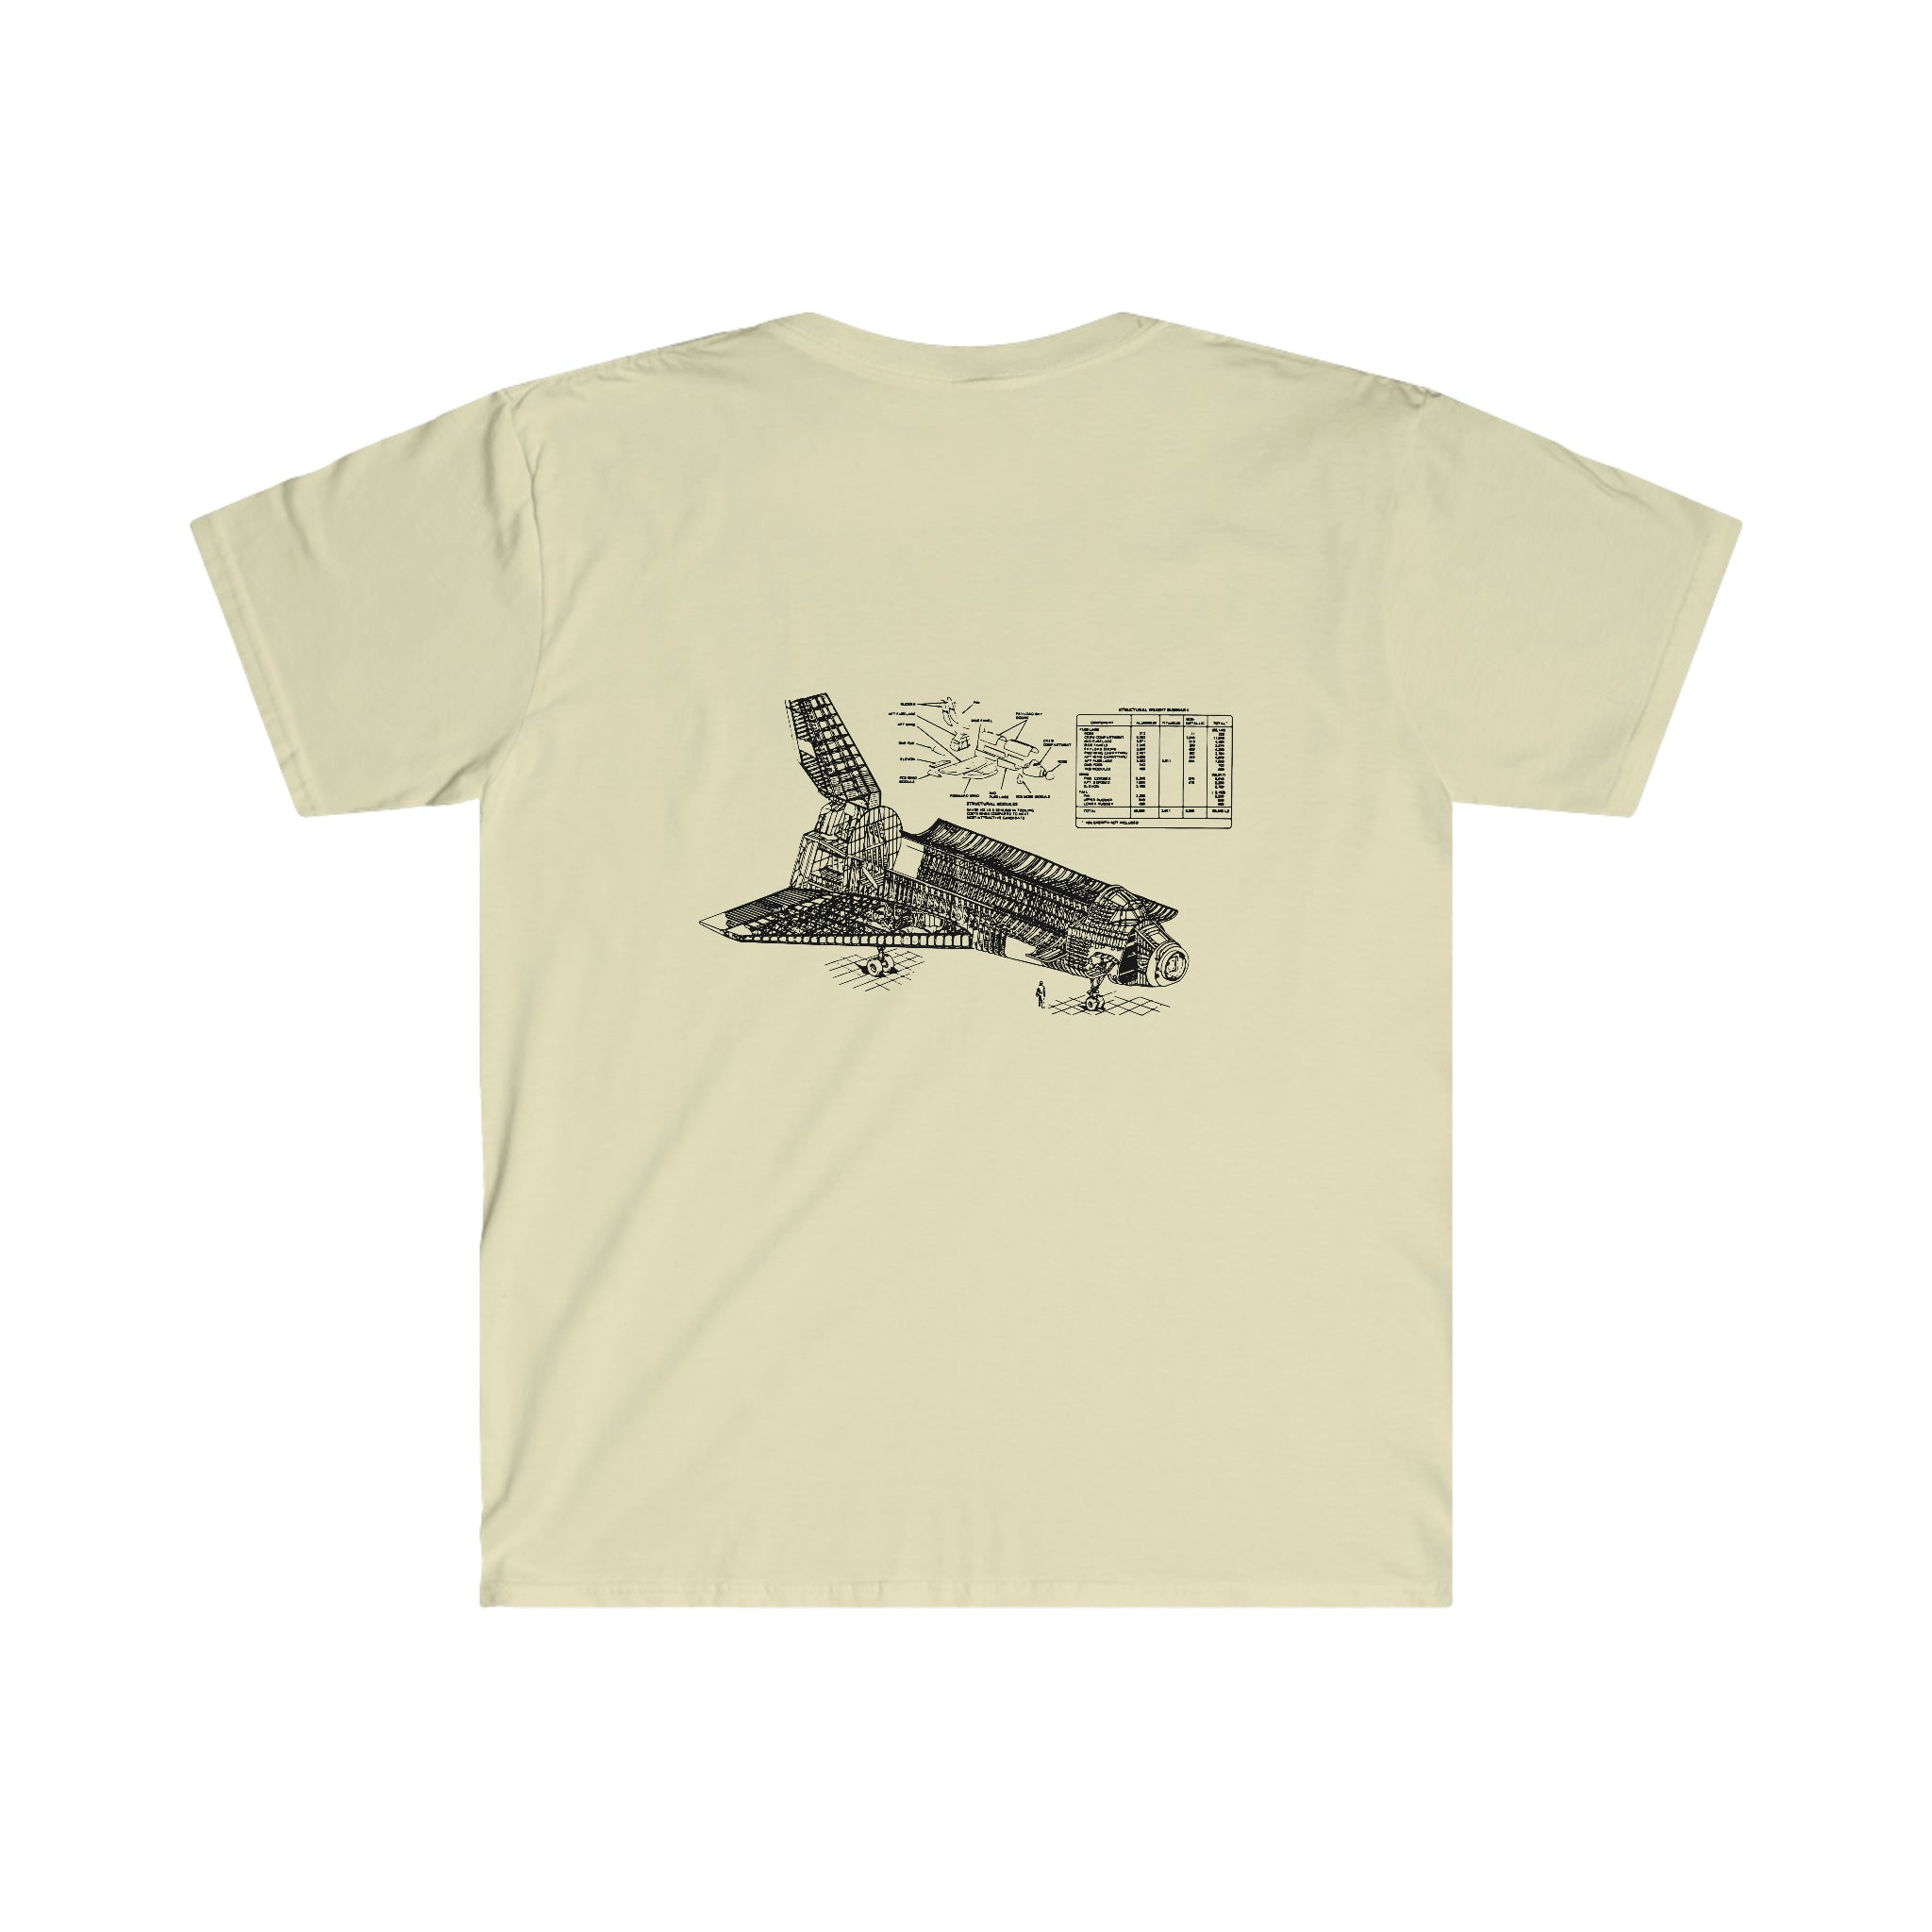 A Space is my goal T-Shirt with a drawing of a plane on it, perfect for your wardrobe.